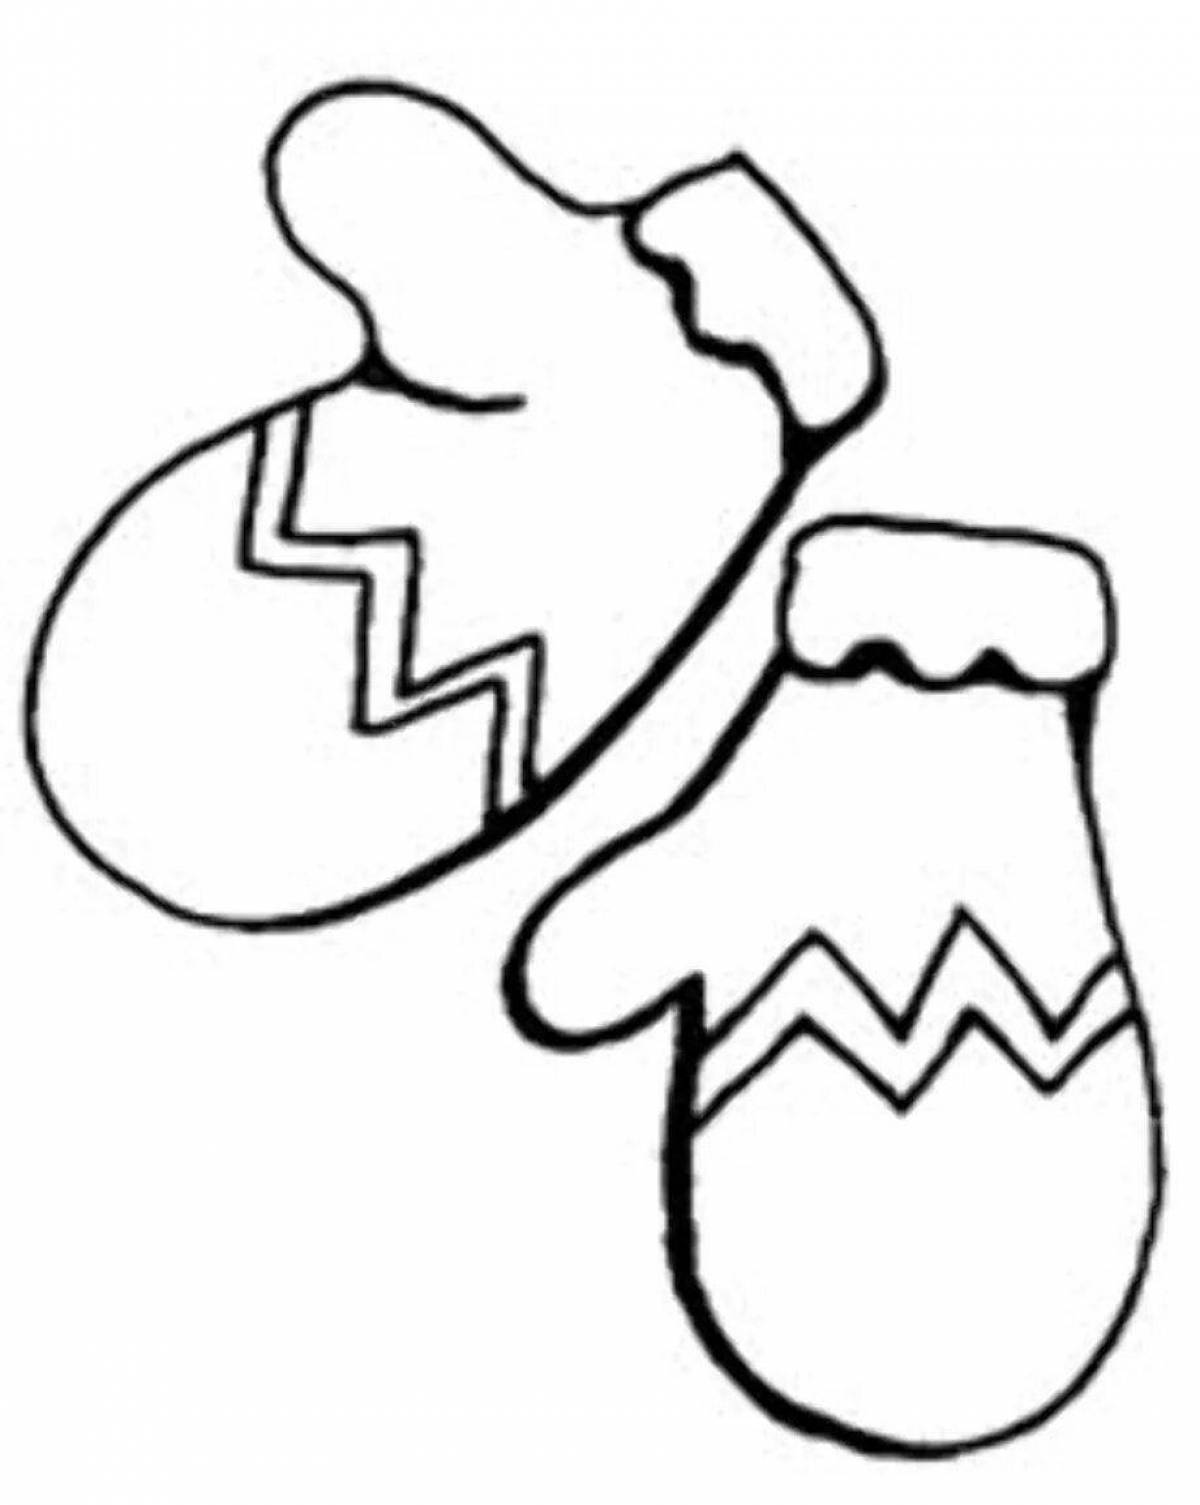 Coloring page cheerful santa claus mitten